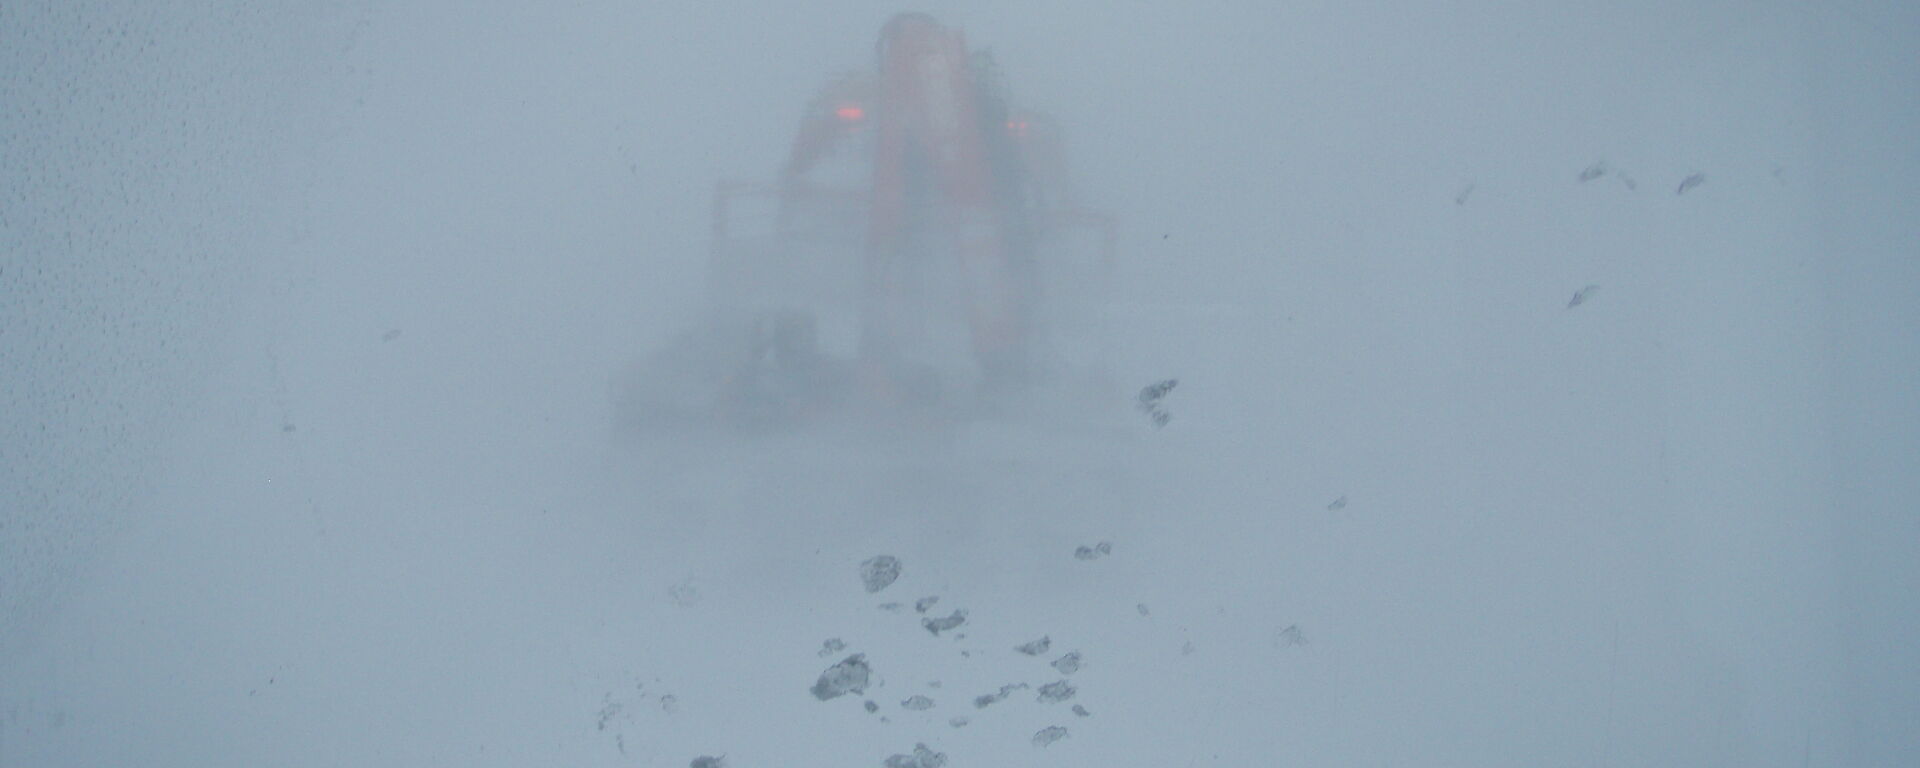 Reduced visibility of a red Hägglunds